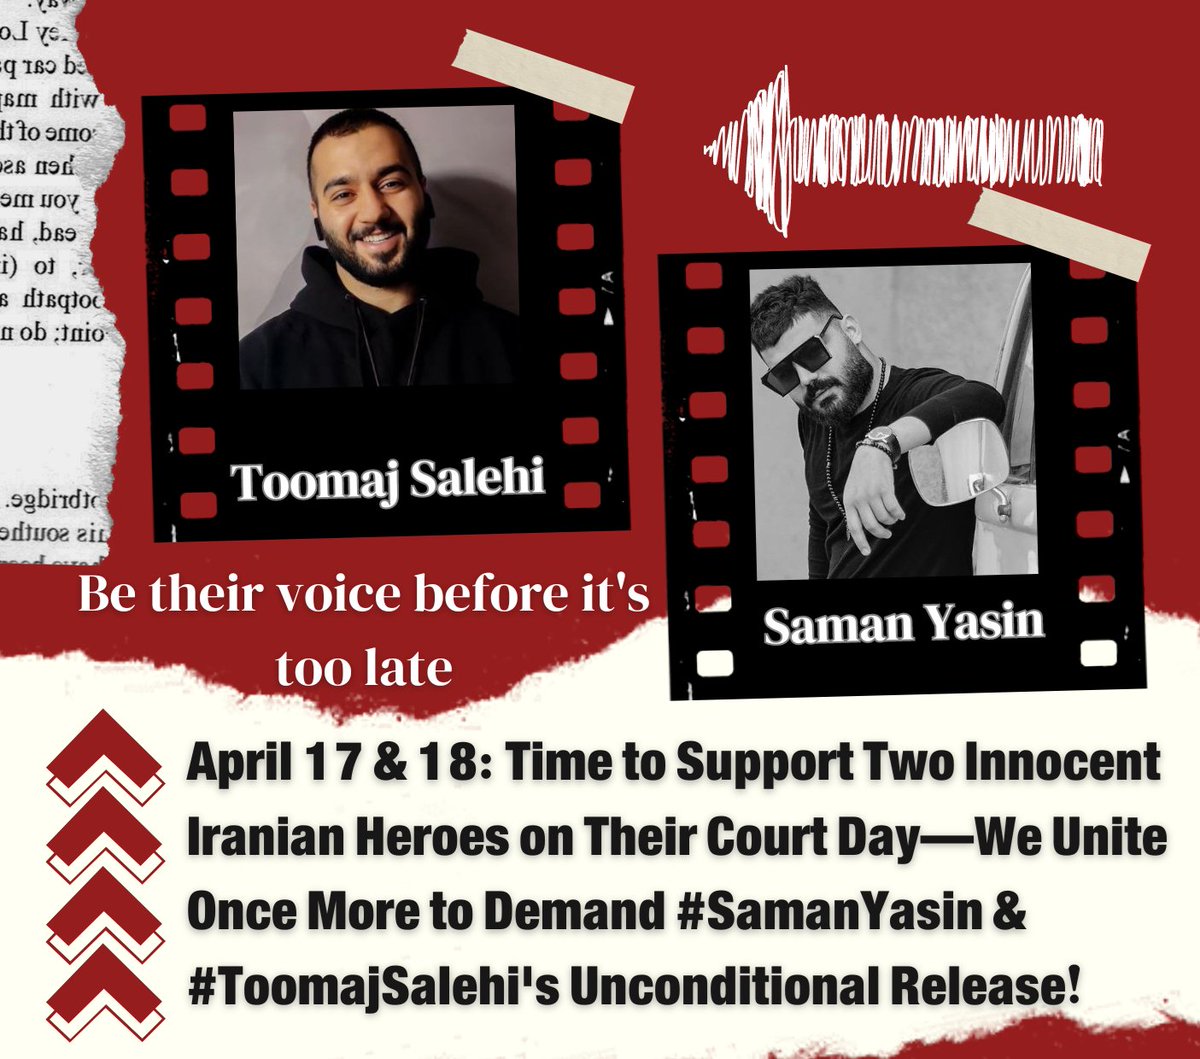 Art is not a crime, and an artist is not a criminal! On April 17 and 18, #SamanYasin and #ToomajSalehi face their court dates, prosecuted simply for defying the oppression of #IRGCterrorists. We stand with them and demand their unconditional release!